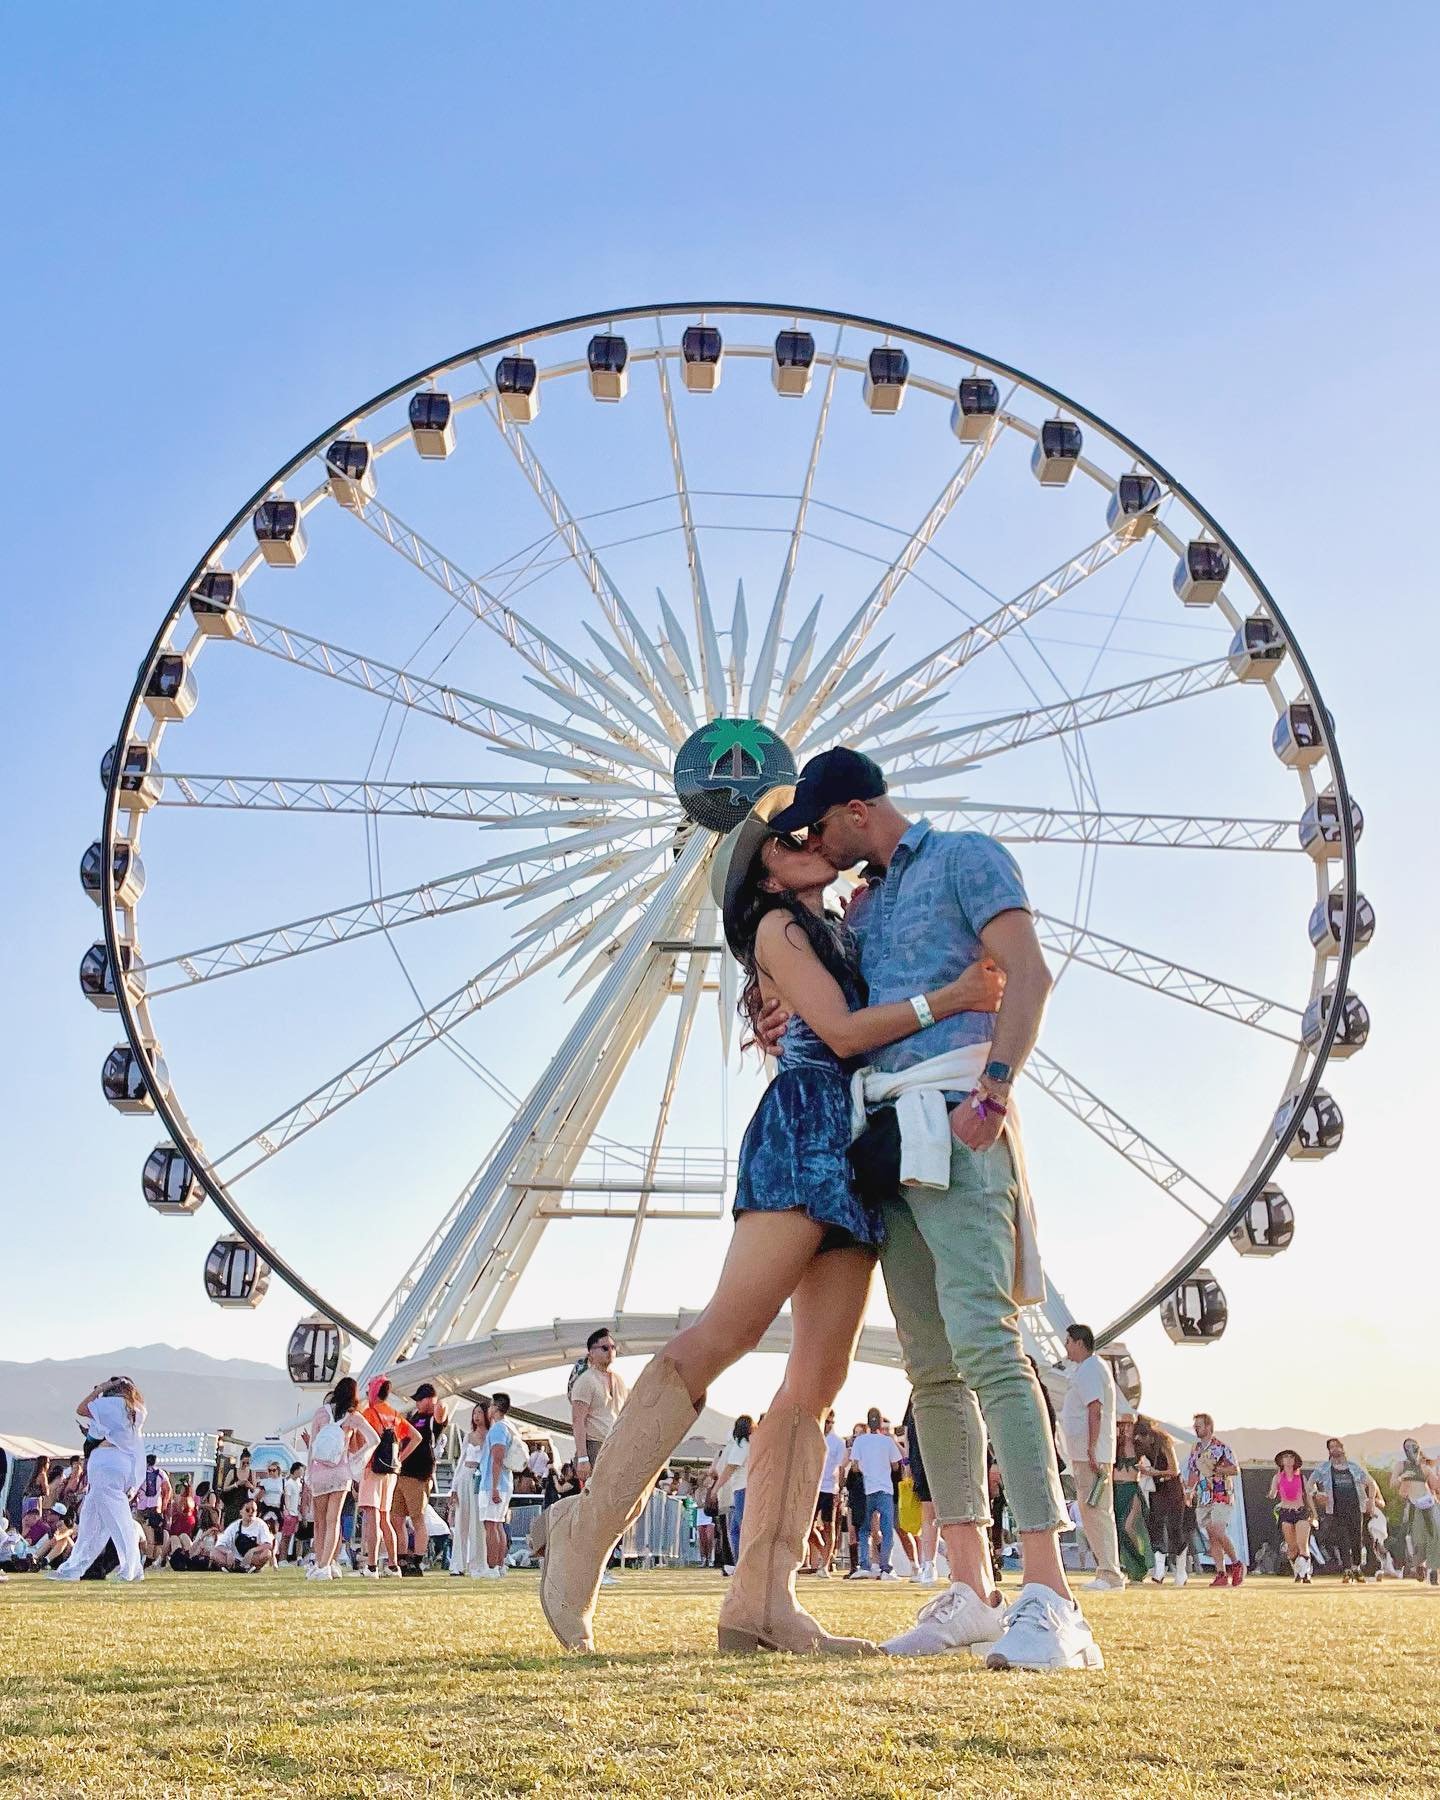 Happy 11th year of Coachella, my love. 🎡

Another fun time dancing in the desert we now call home. And yes, I will always make you take our annual grass photo on the field. 🫶🏽